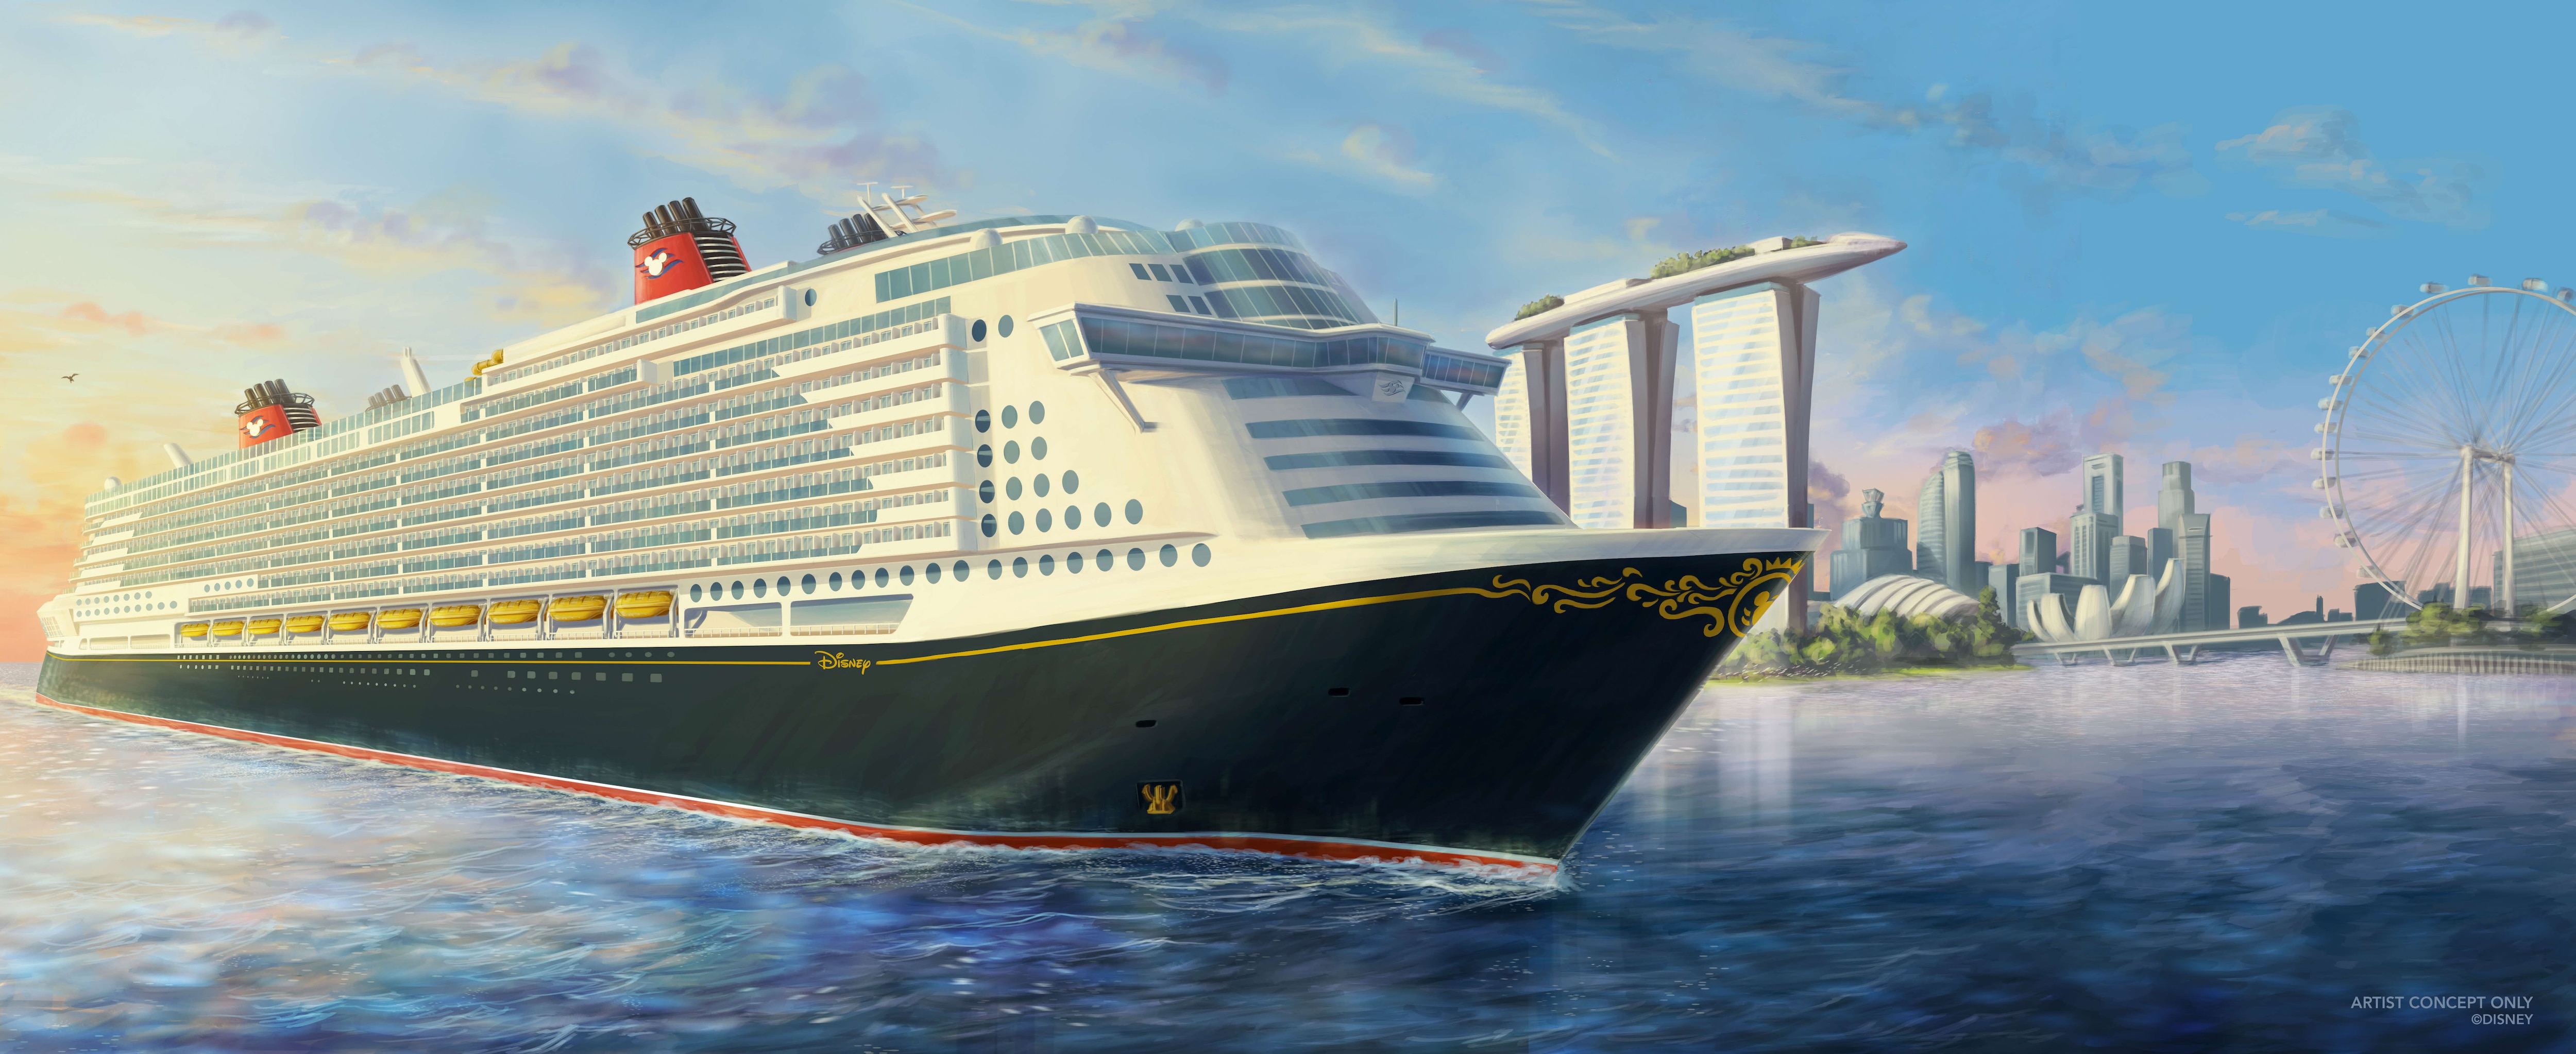 An artist's rendering of the new Disney cruise ship to homeport in Singapore. Handout/Disney Cruise Line